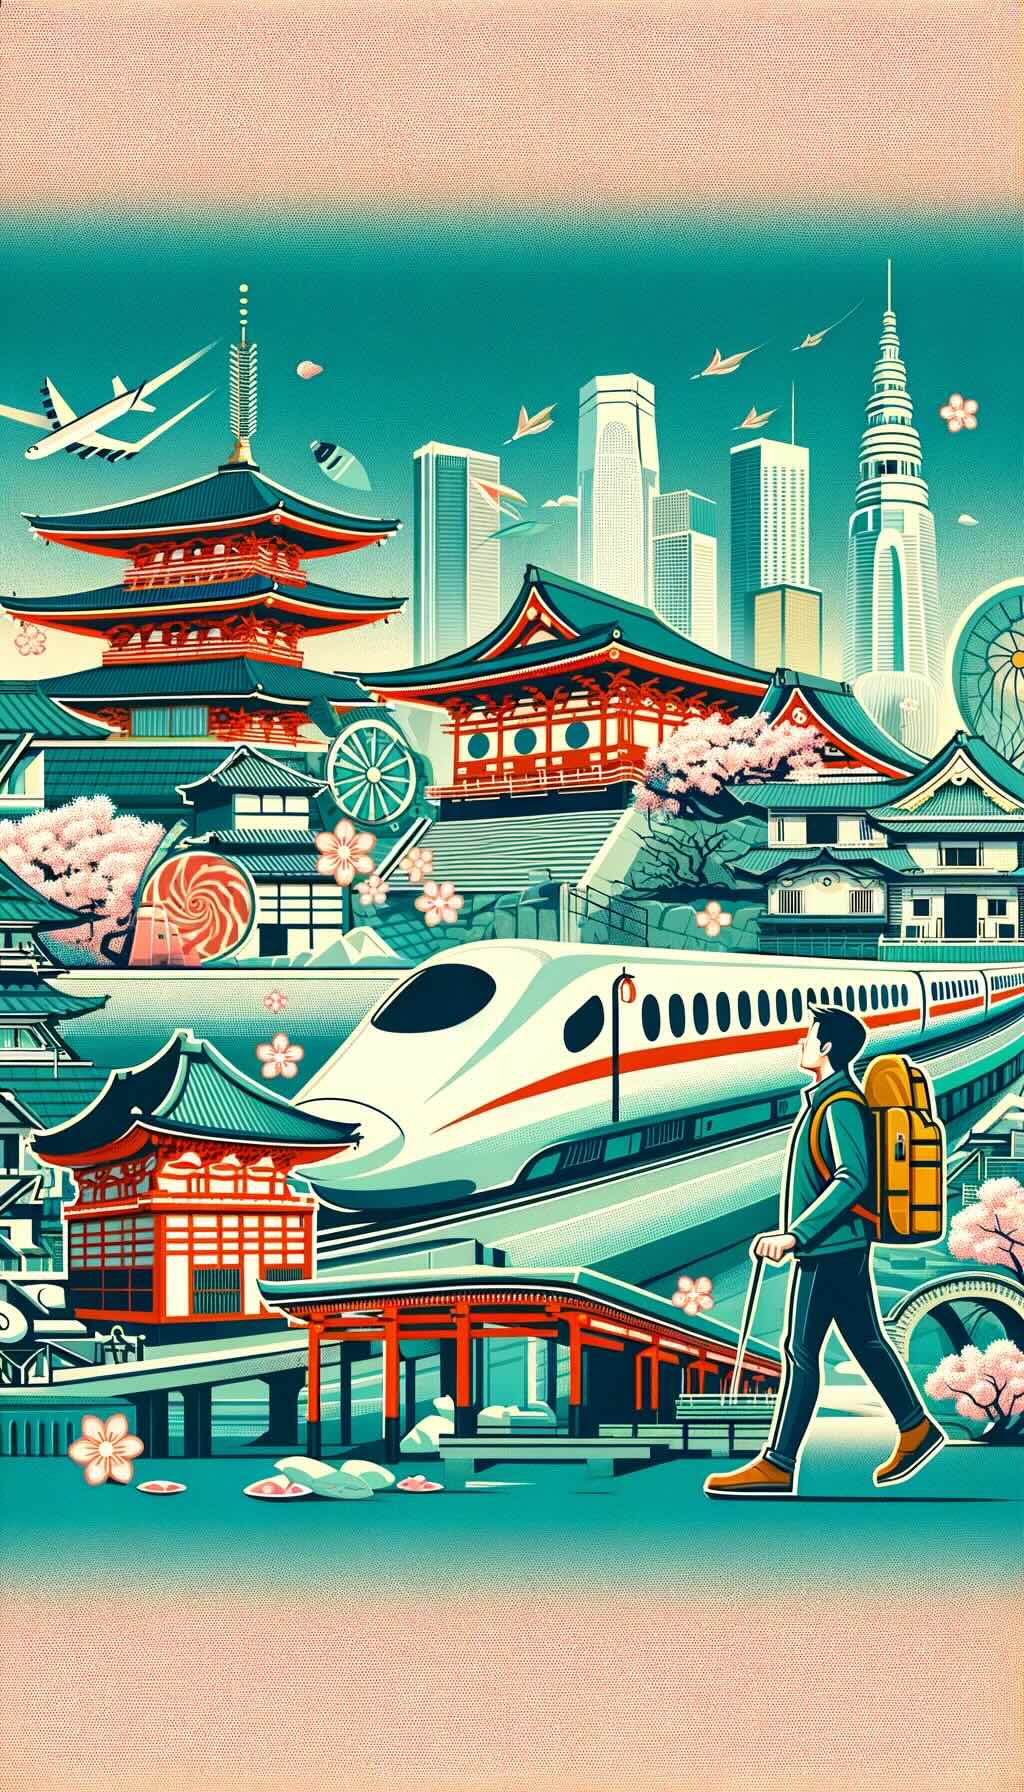 Theme of solo travel in Japan, showcasing a solo traveler navigating through the safe and culturally rich environment of Japan. The image captures iconic elements like the Shinkansen, traditional temples, and urban cityscapes, symbolizing the safety, cultural immersion, and independence associated with solo travel in Japan